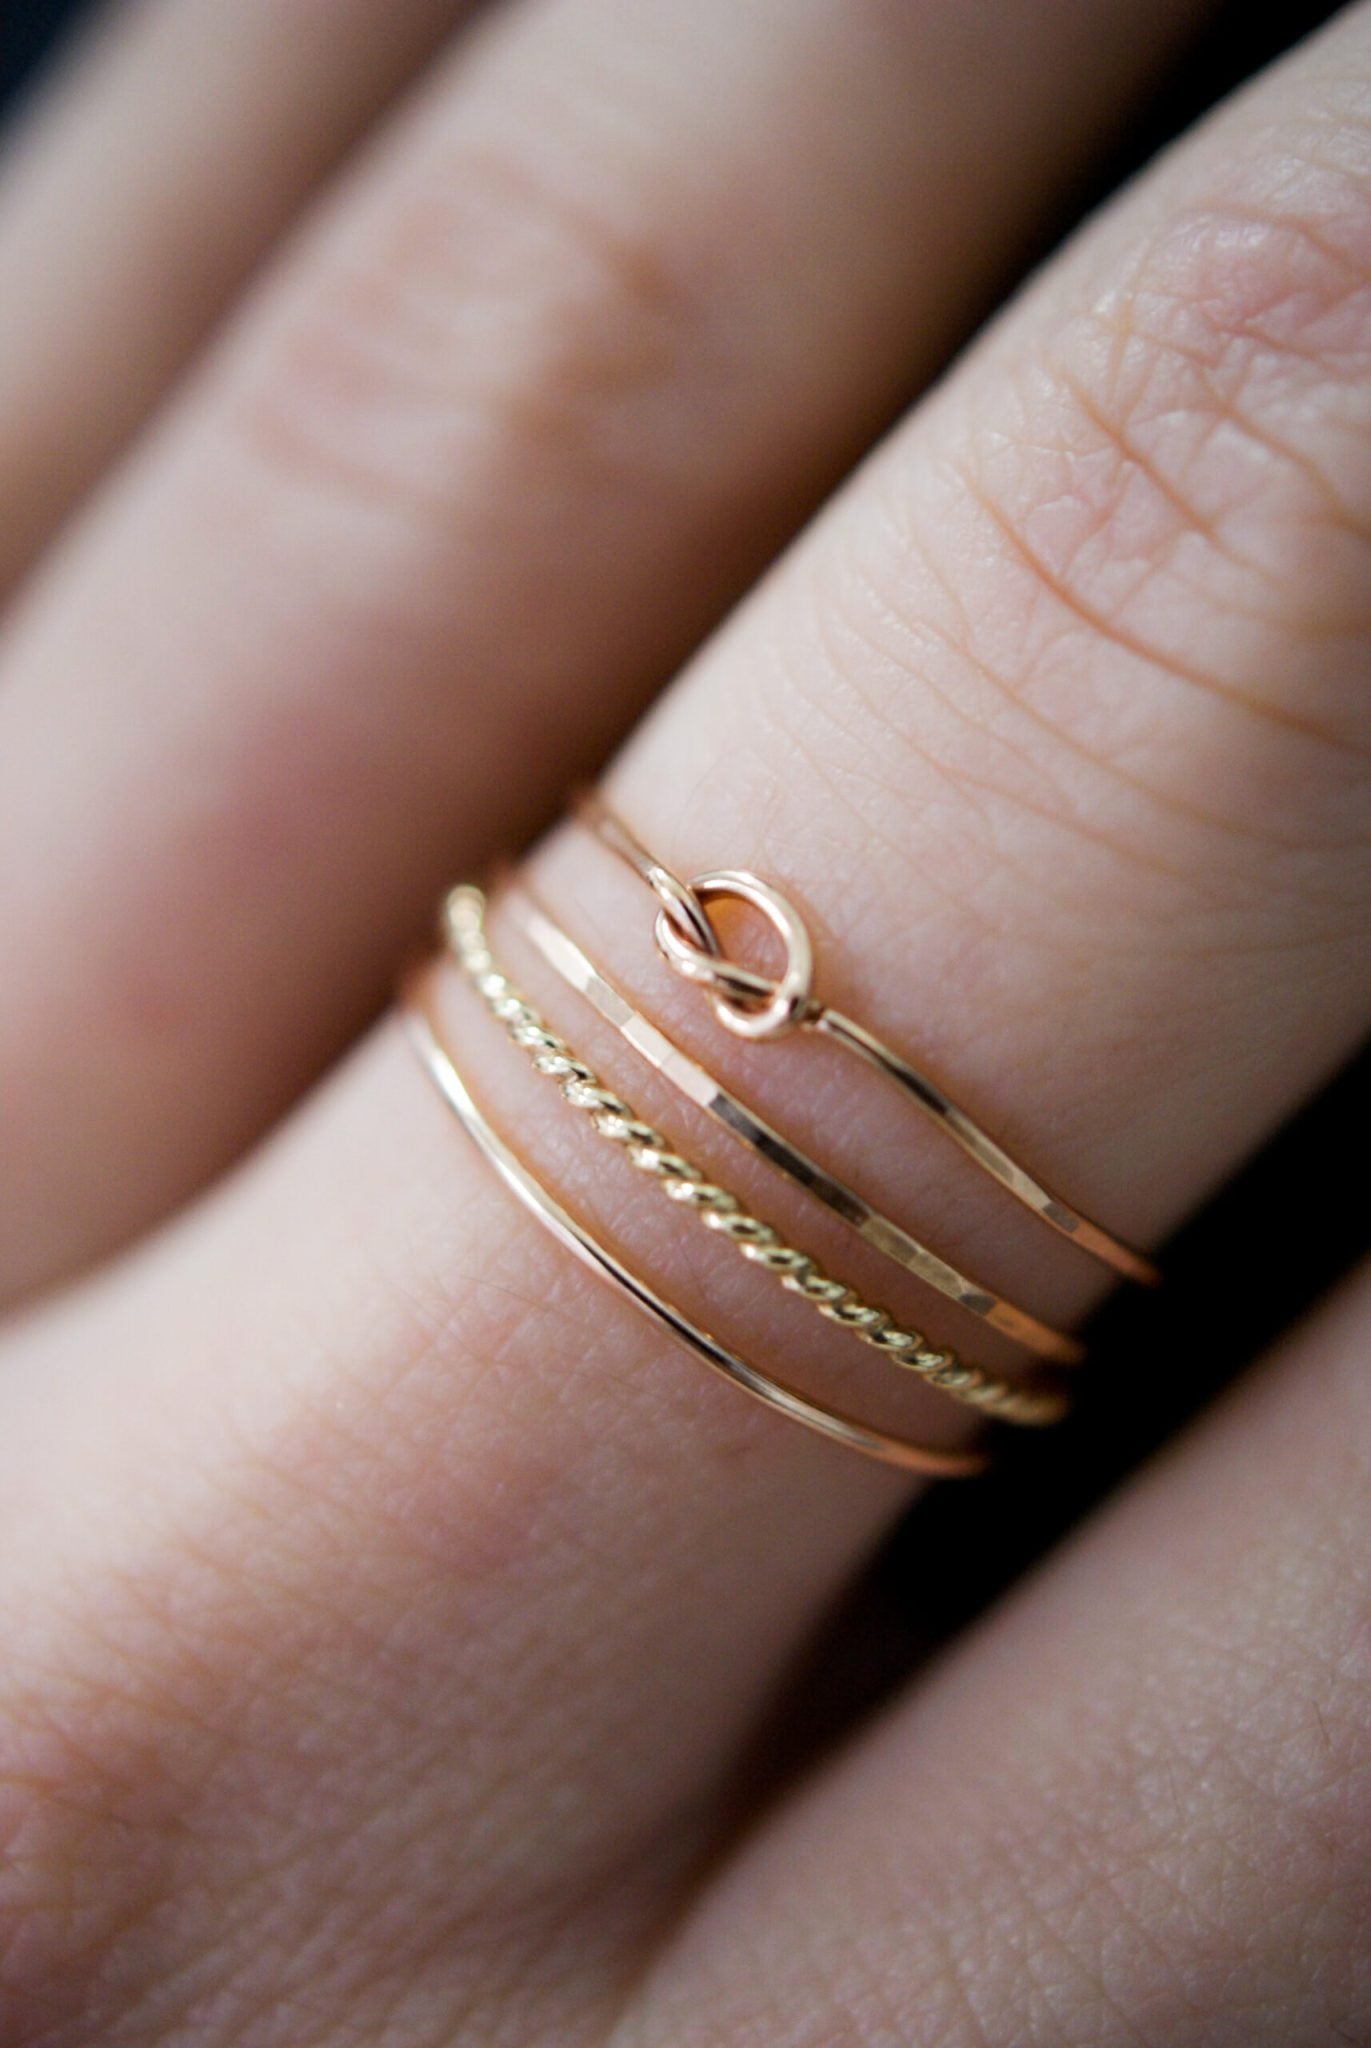 Open Knot & Twist Mixed Texture Ring Set of 4, Gold Fill, Rose Gold Fill or Sterling Silver